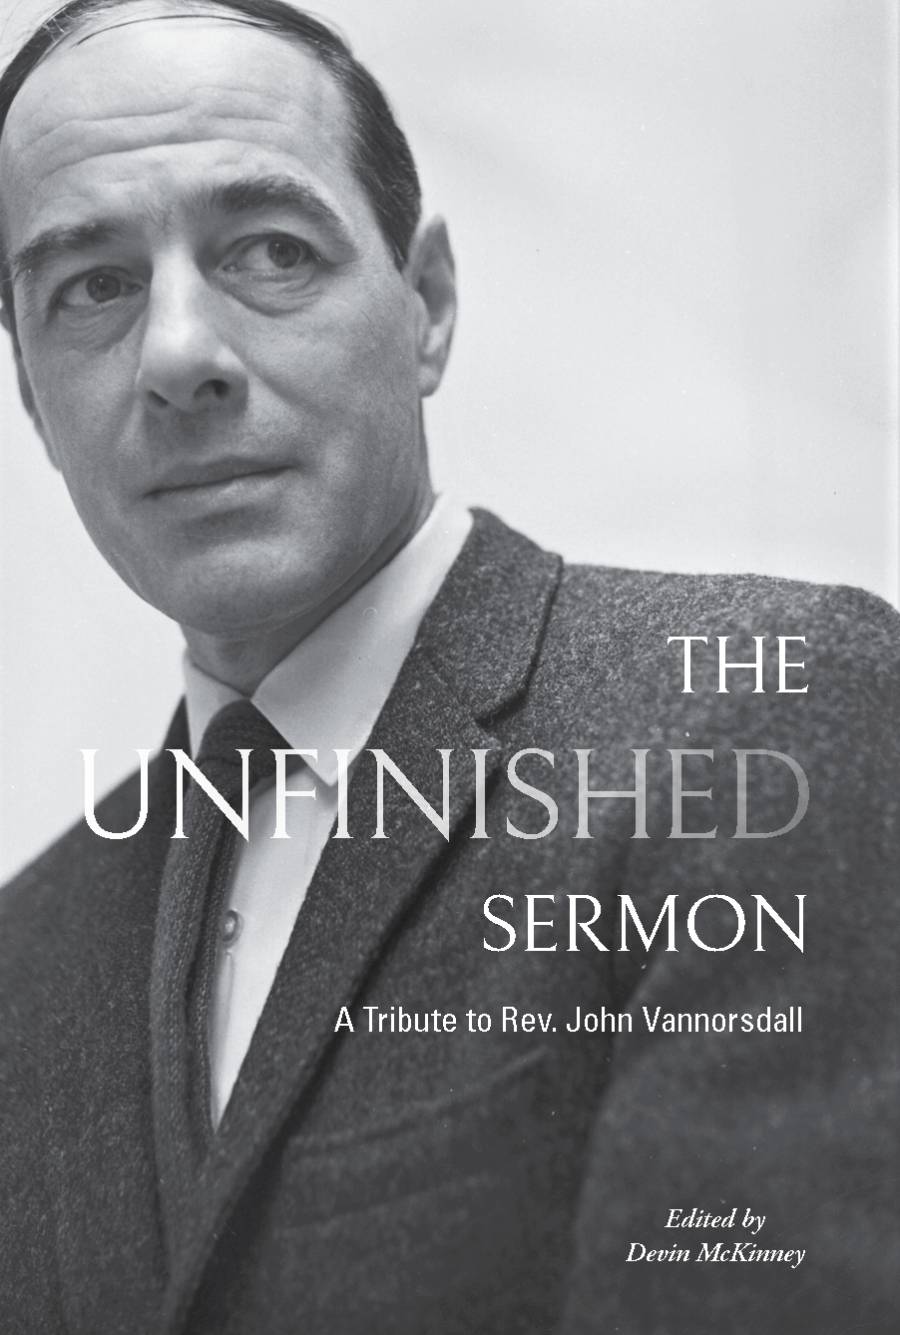 The Unfinished Sermon book cover